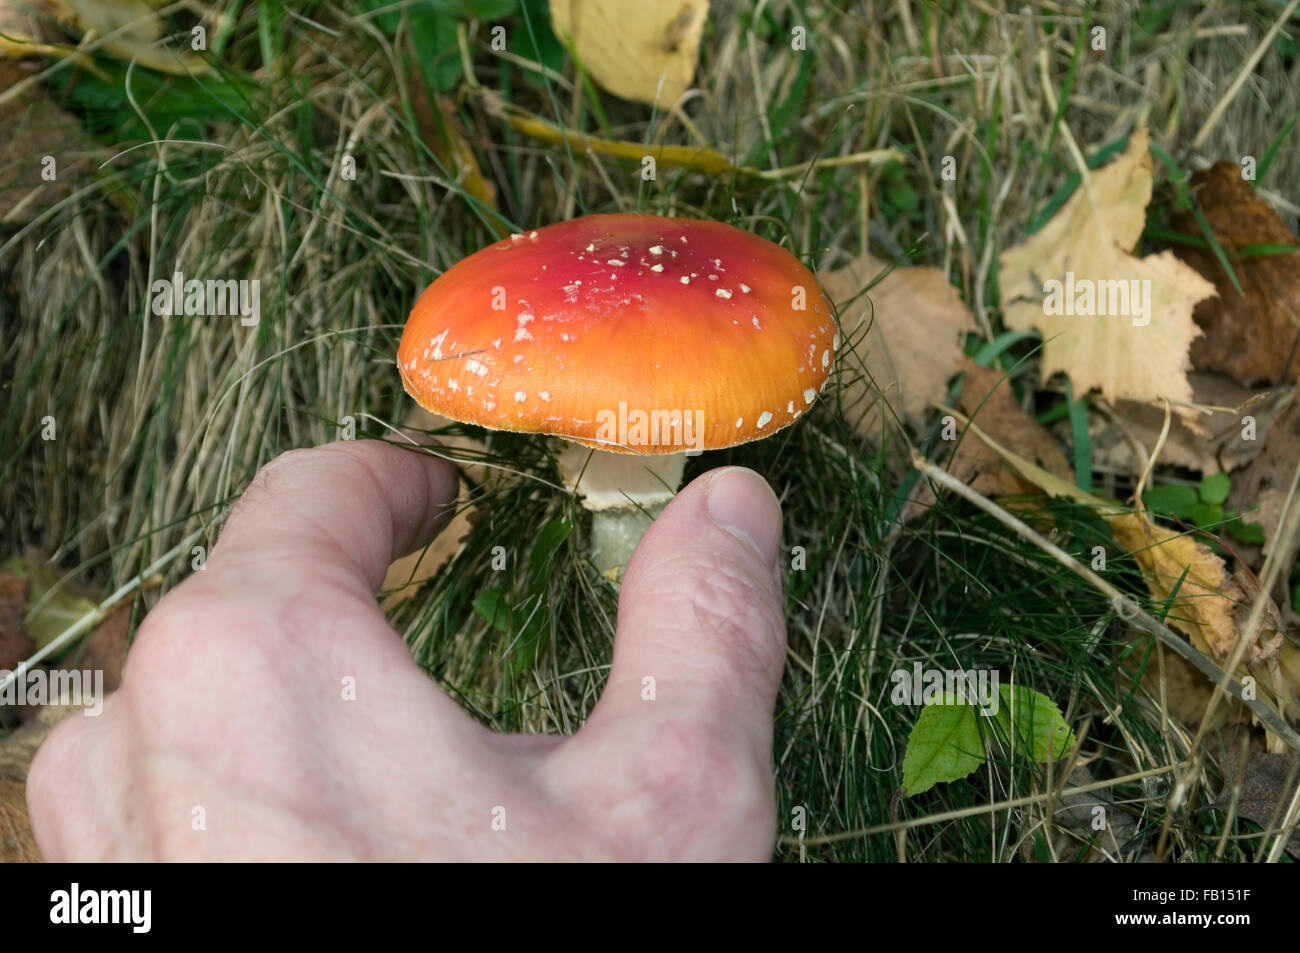 Hand picking a poisonous mushroom Stock Photo